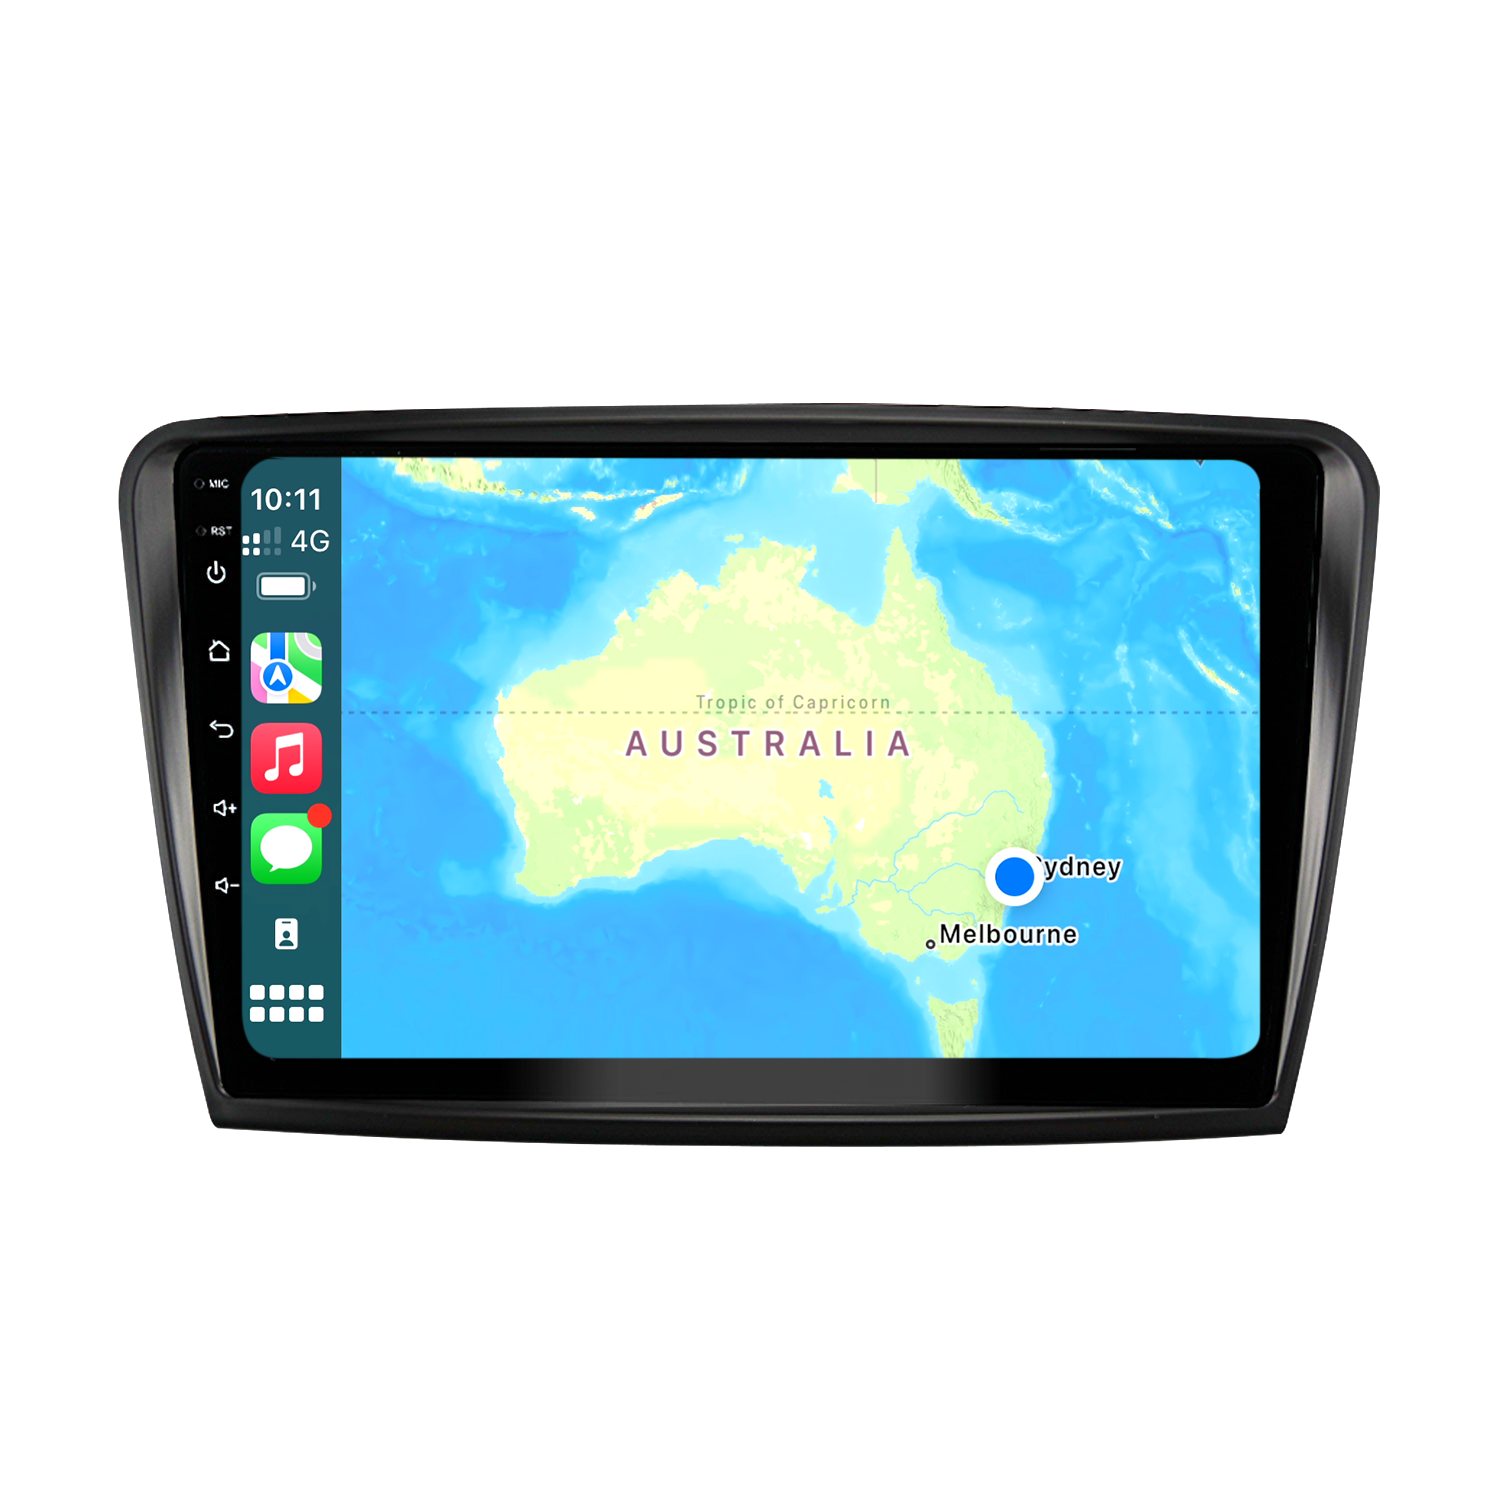 An in-car display screen showing the Apple CarPlay interface with various apps like Phone, Music, Maps, Messages, Now Playing, Car, Podcasts, and Audiobooks. The display shows 4G connectivity, time, and other control icons on the left side. Right hand side shows the Map Display, a car head unit screen displaying a map of Australia with marked locations of Sydney and Melbourne, featuring Apple CarPlay icons on the left side and 4G connectivity with the time displayed at the top.